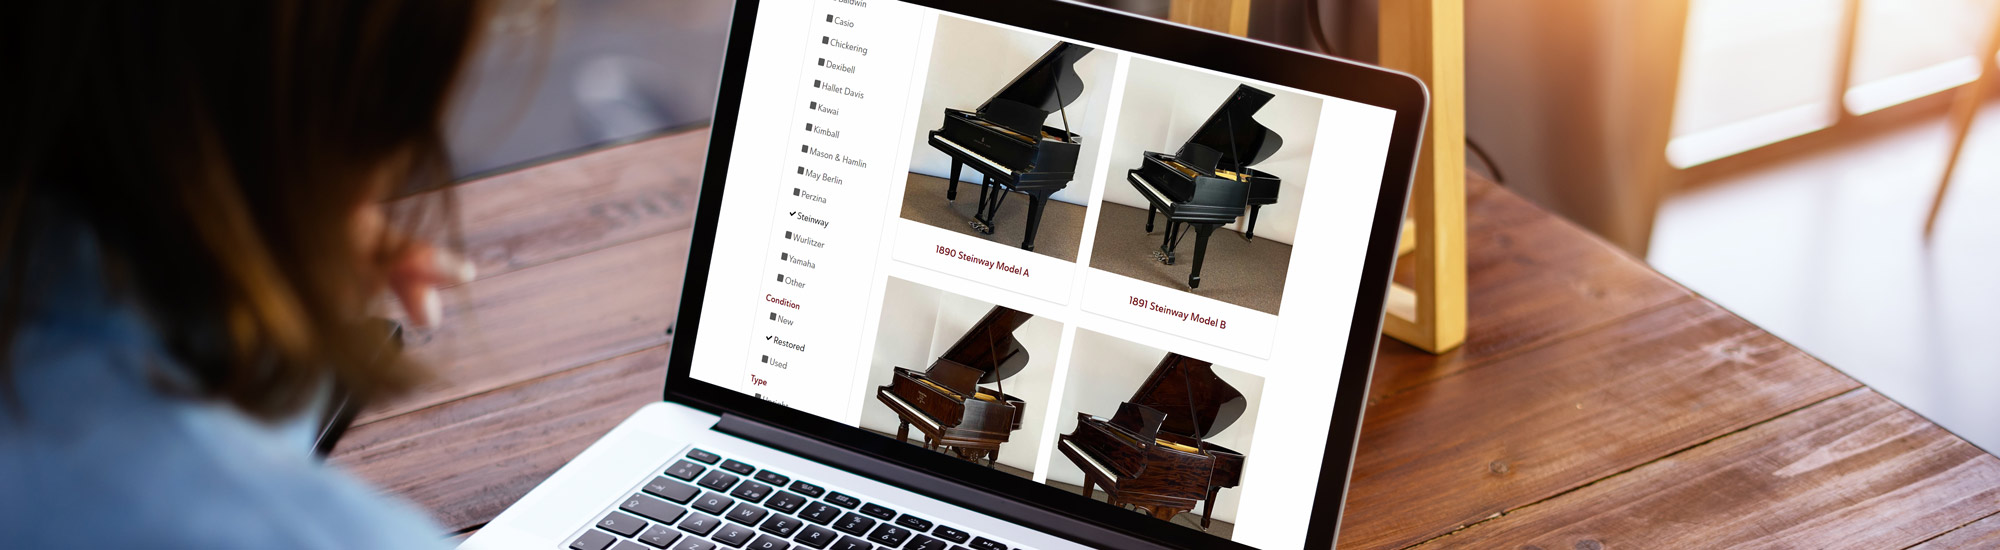 Farley's House of Pianos' piano gallery on a laptop